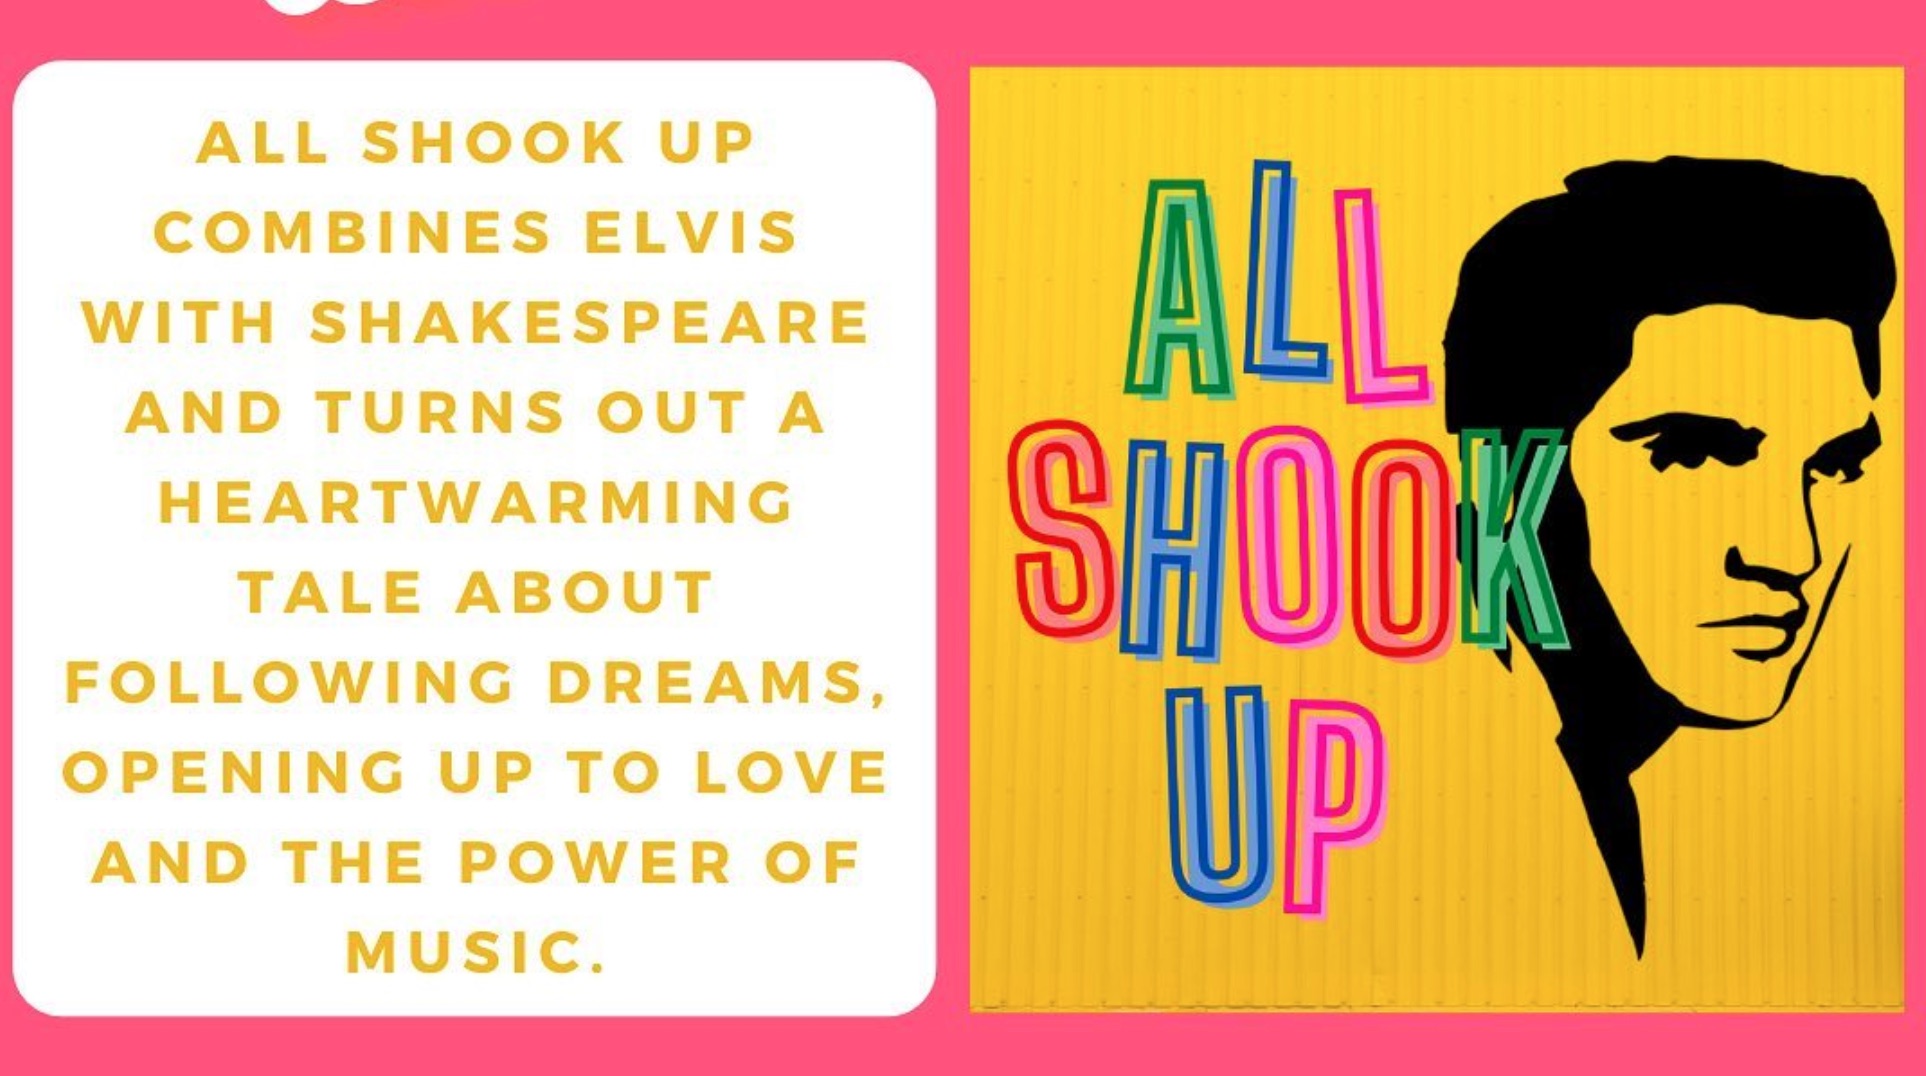 All Shook Up, the Elvis Presley musical by Circle Arts Theatre